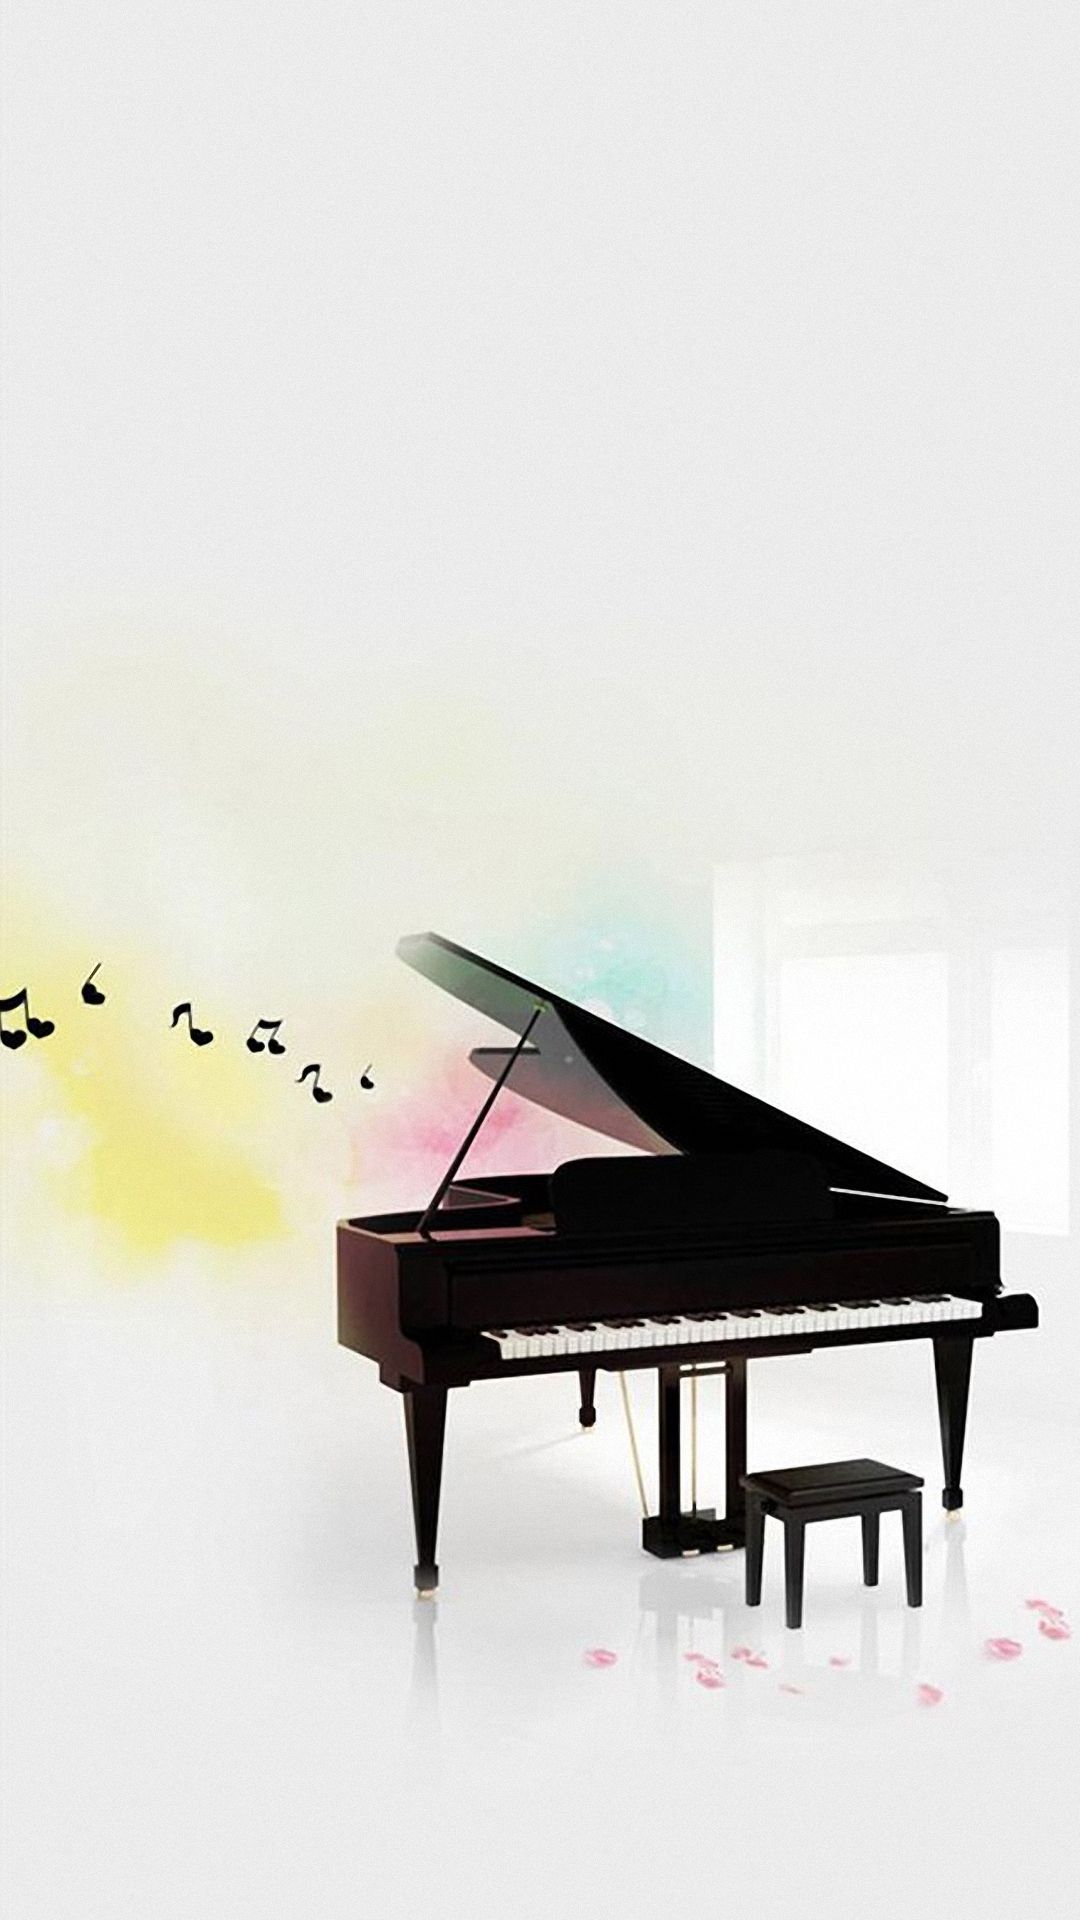 1080x1920 Piano iPhone Wallpaper - Top Free Piano iPhone Background on Wall...